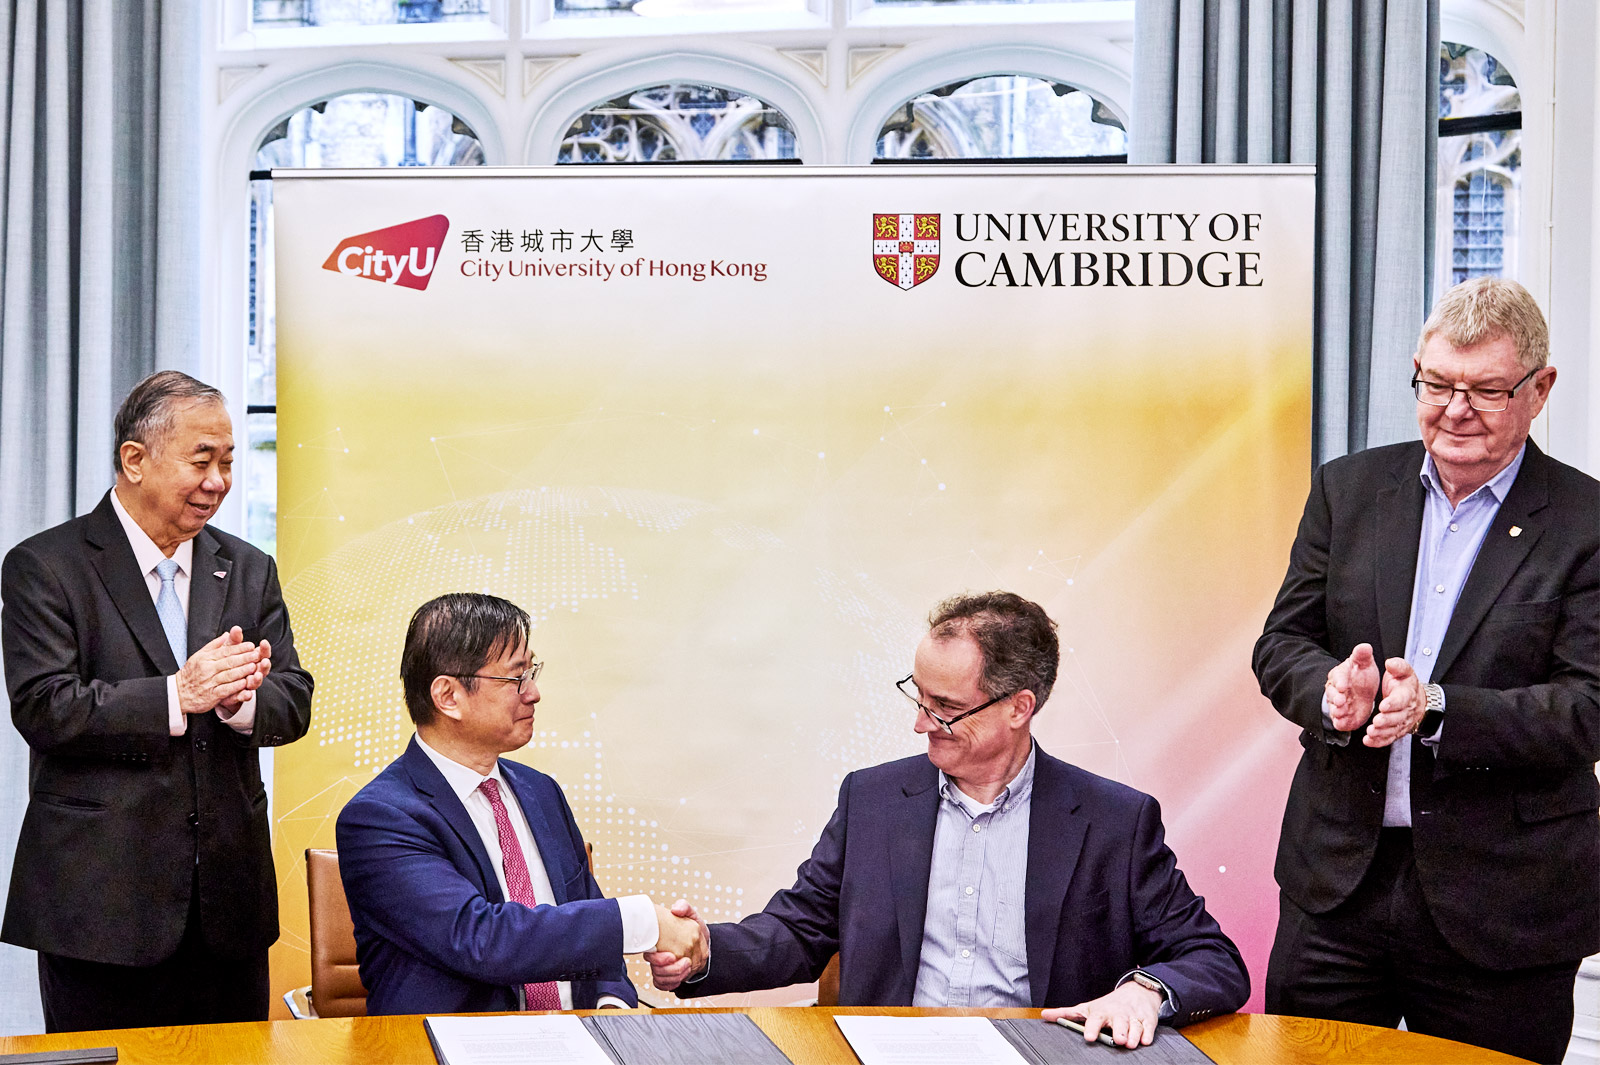 CityUHK signed MoUs with the University of Cambridge